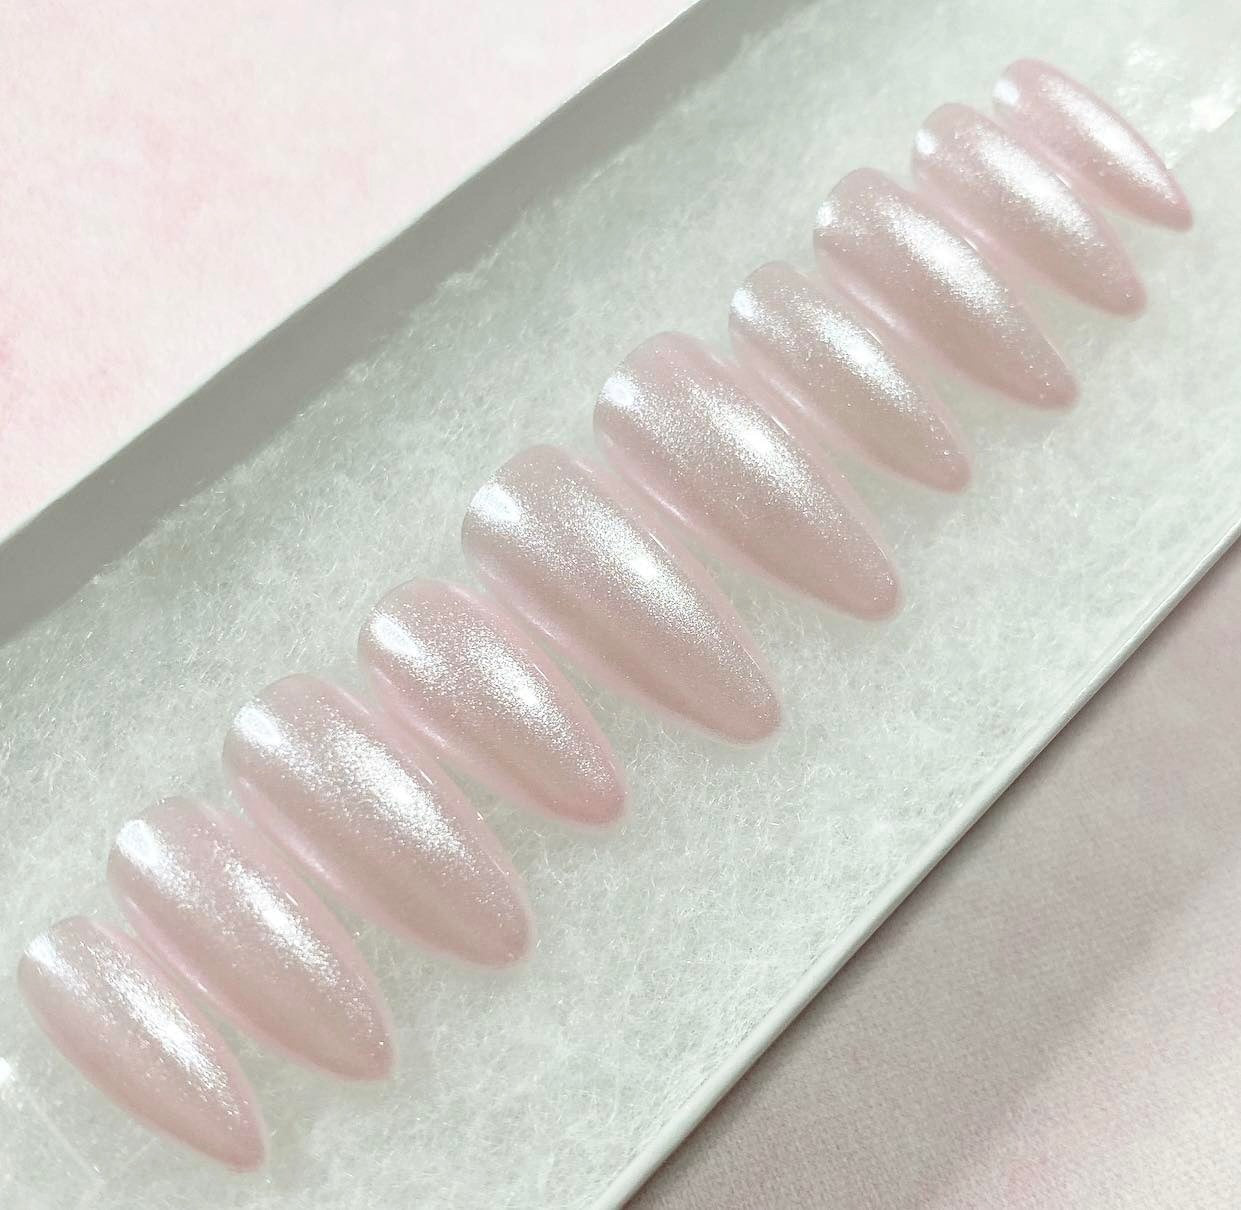 Glazed Donut Hailey Bieber Style Pink Pearl Press-On Nails